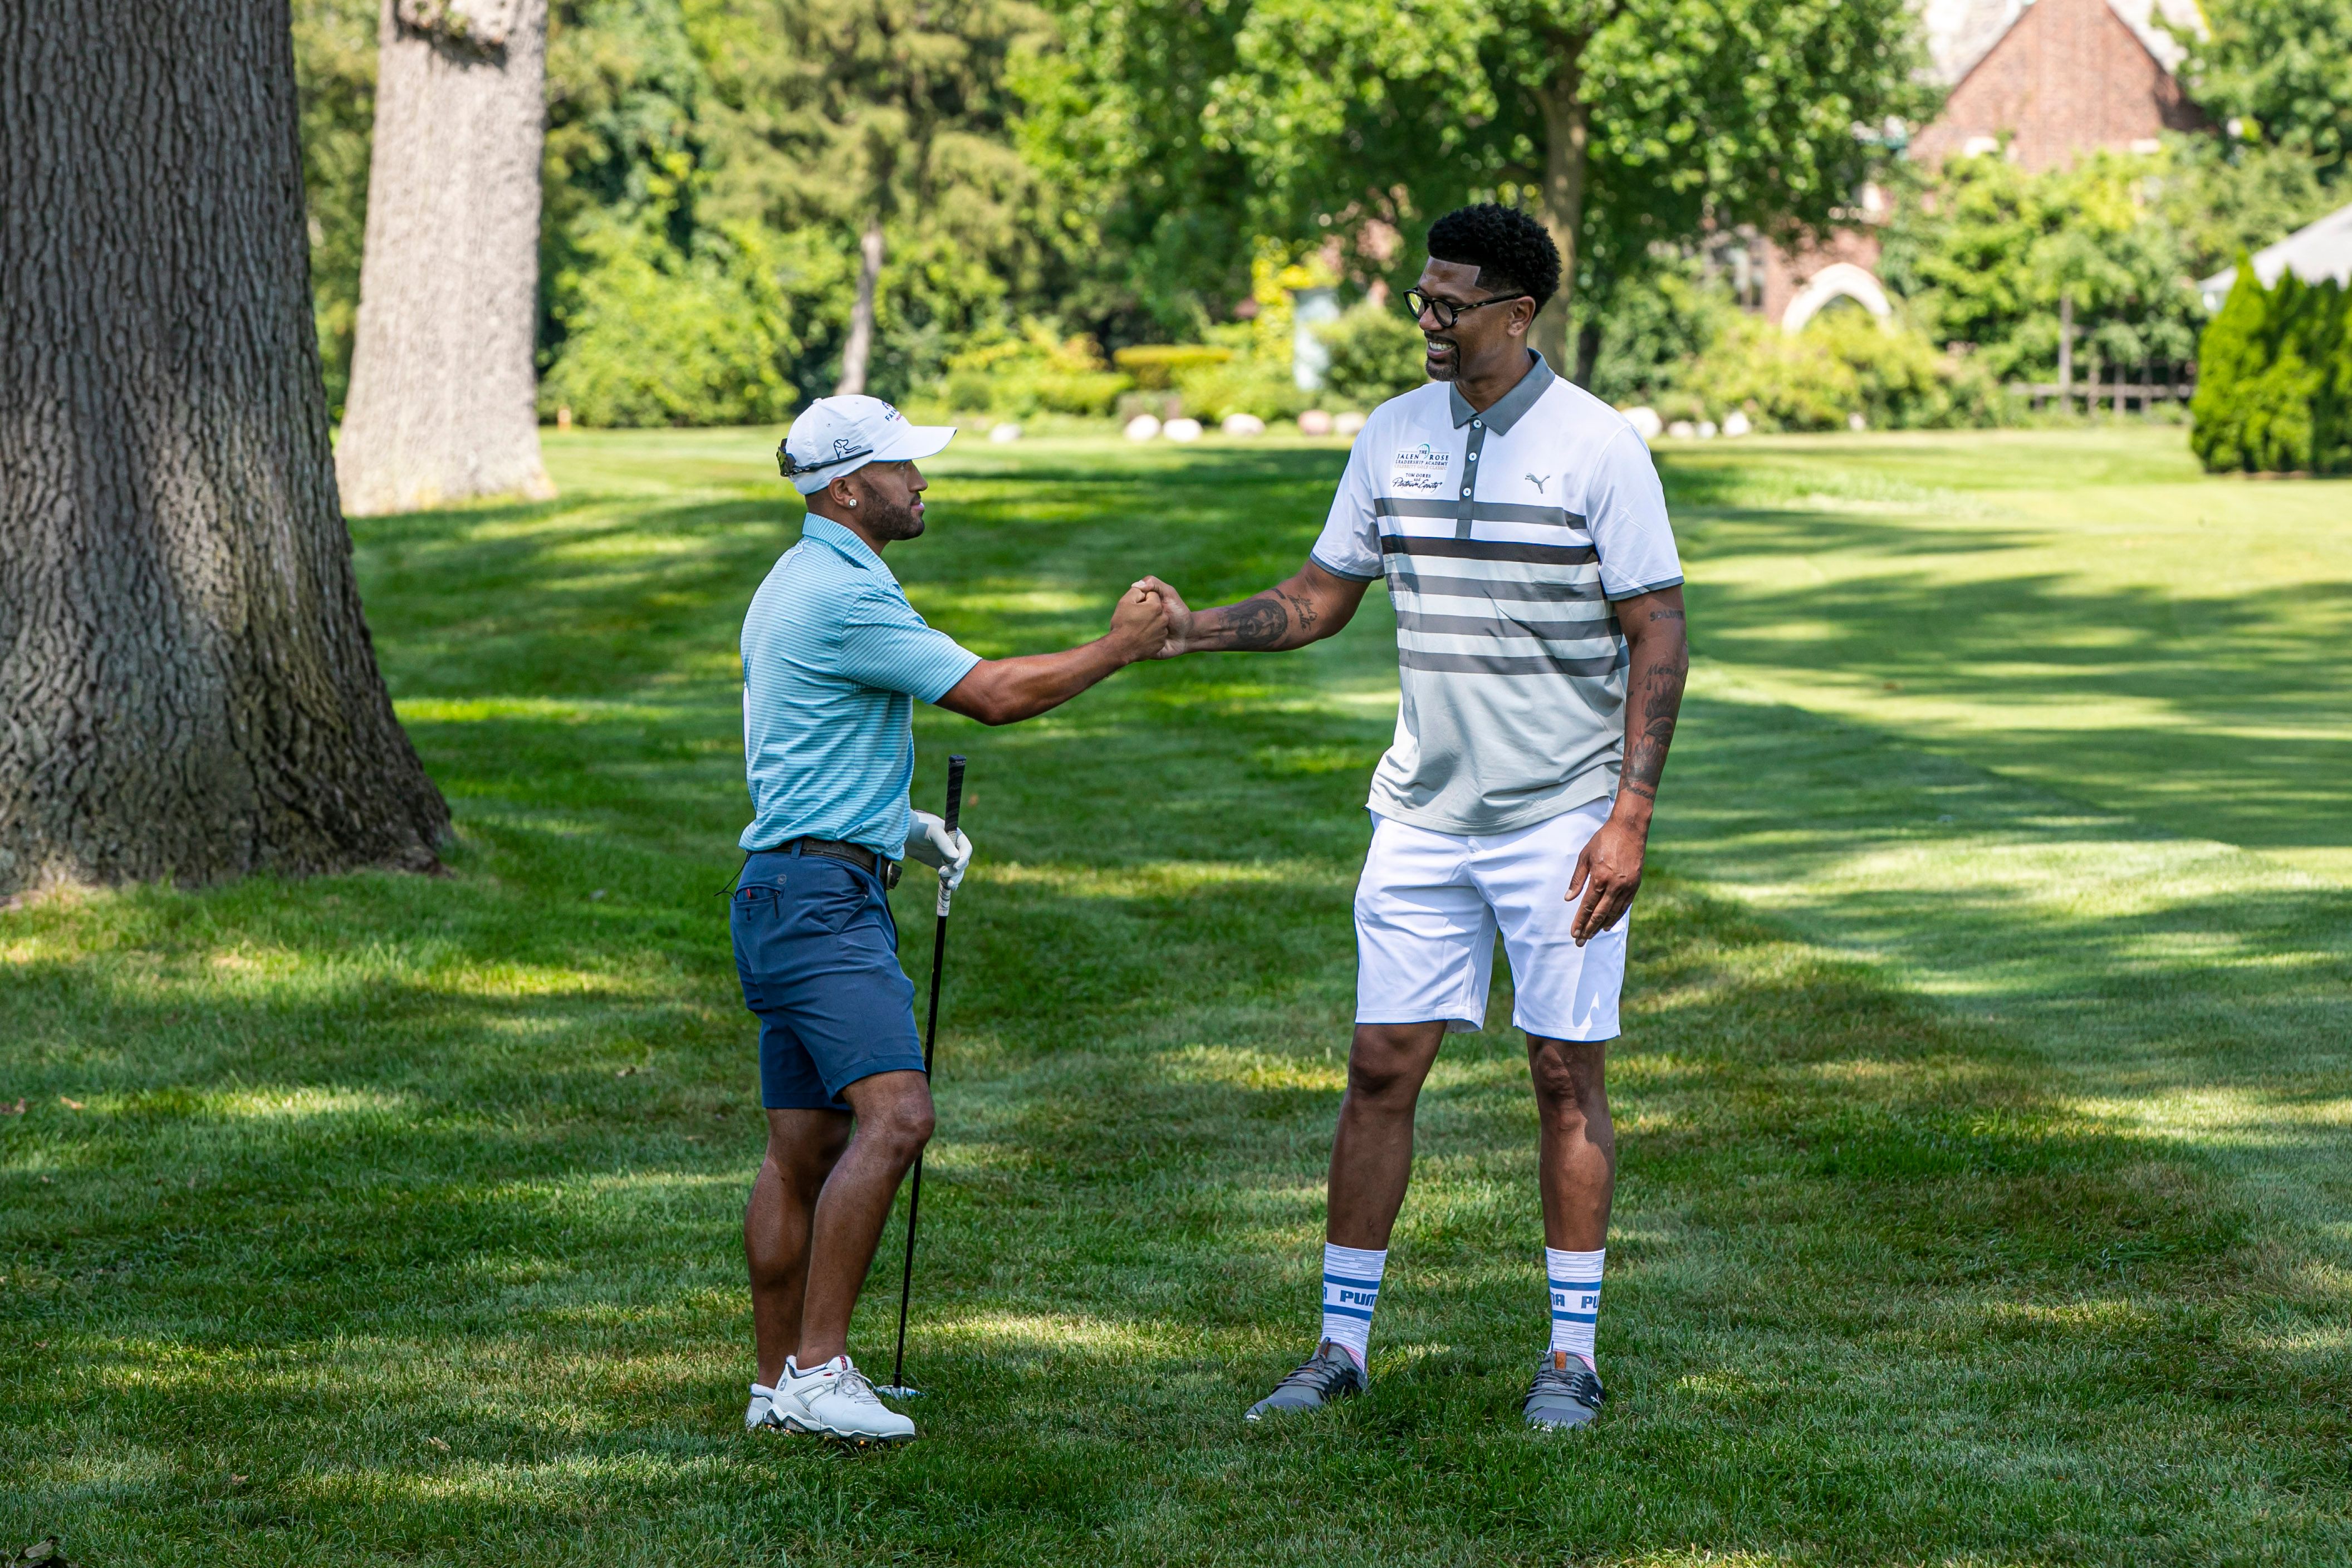 Jalen Rose (L) and Willie Mack 3 (R) fist-bump in the fairway at Detroit Golf Club at the Jalen Rose Golf Classic, A PGD Global Production on August 23, 2021.